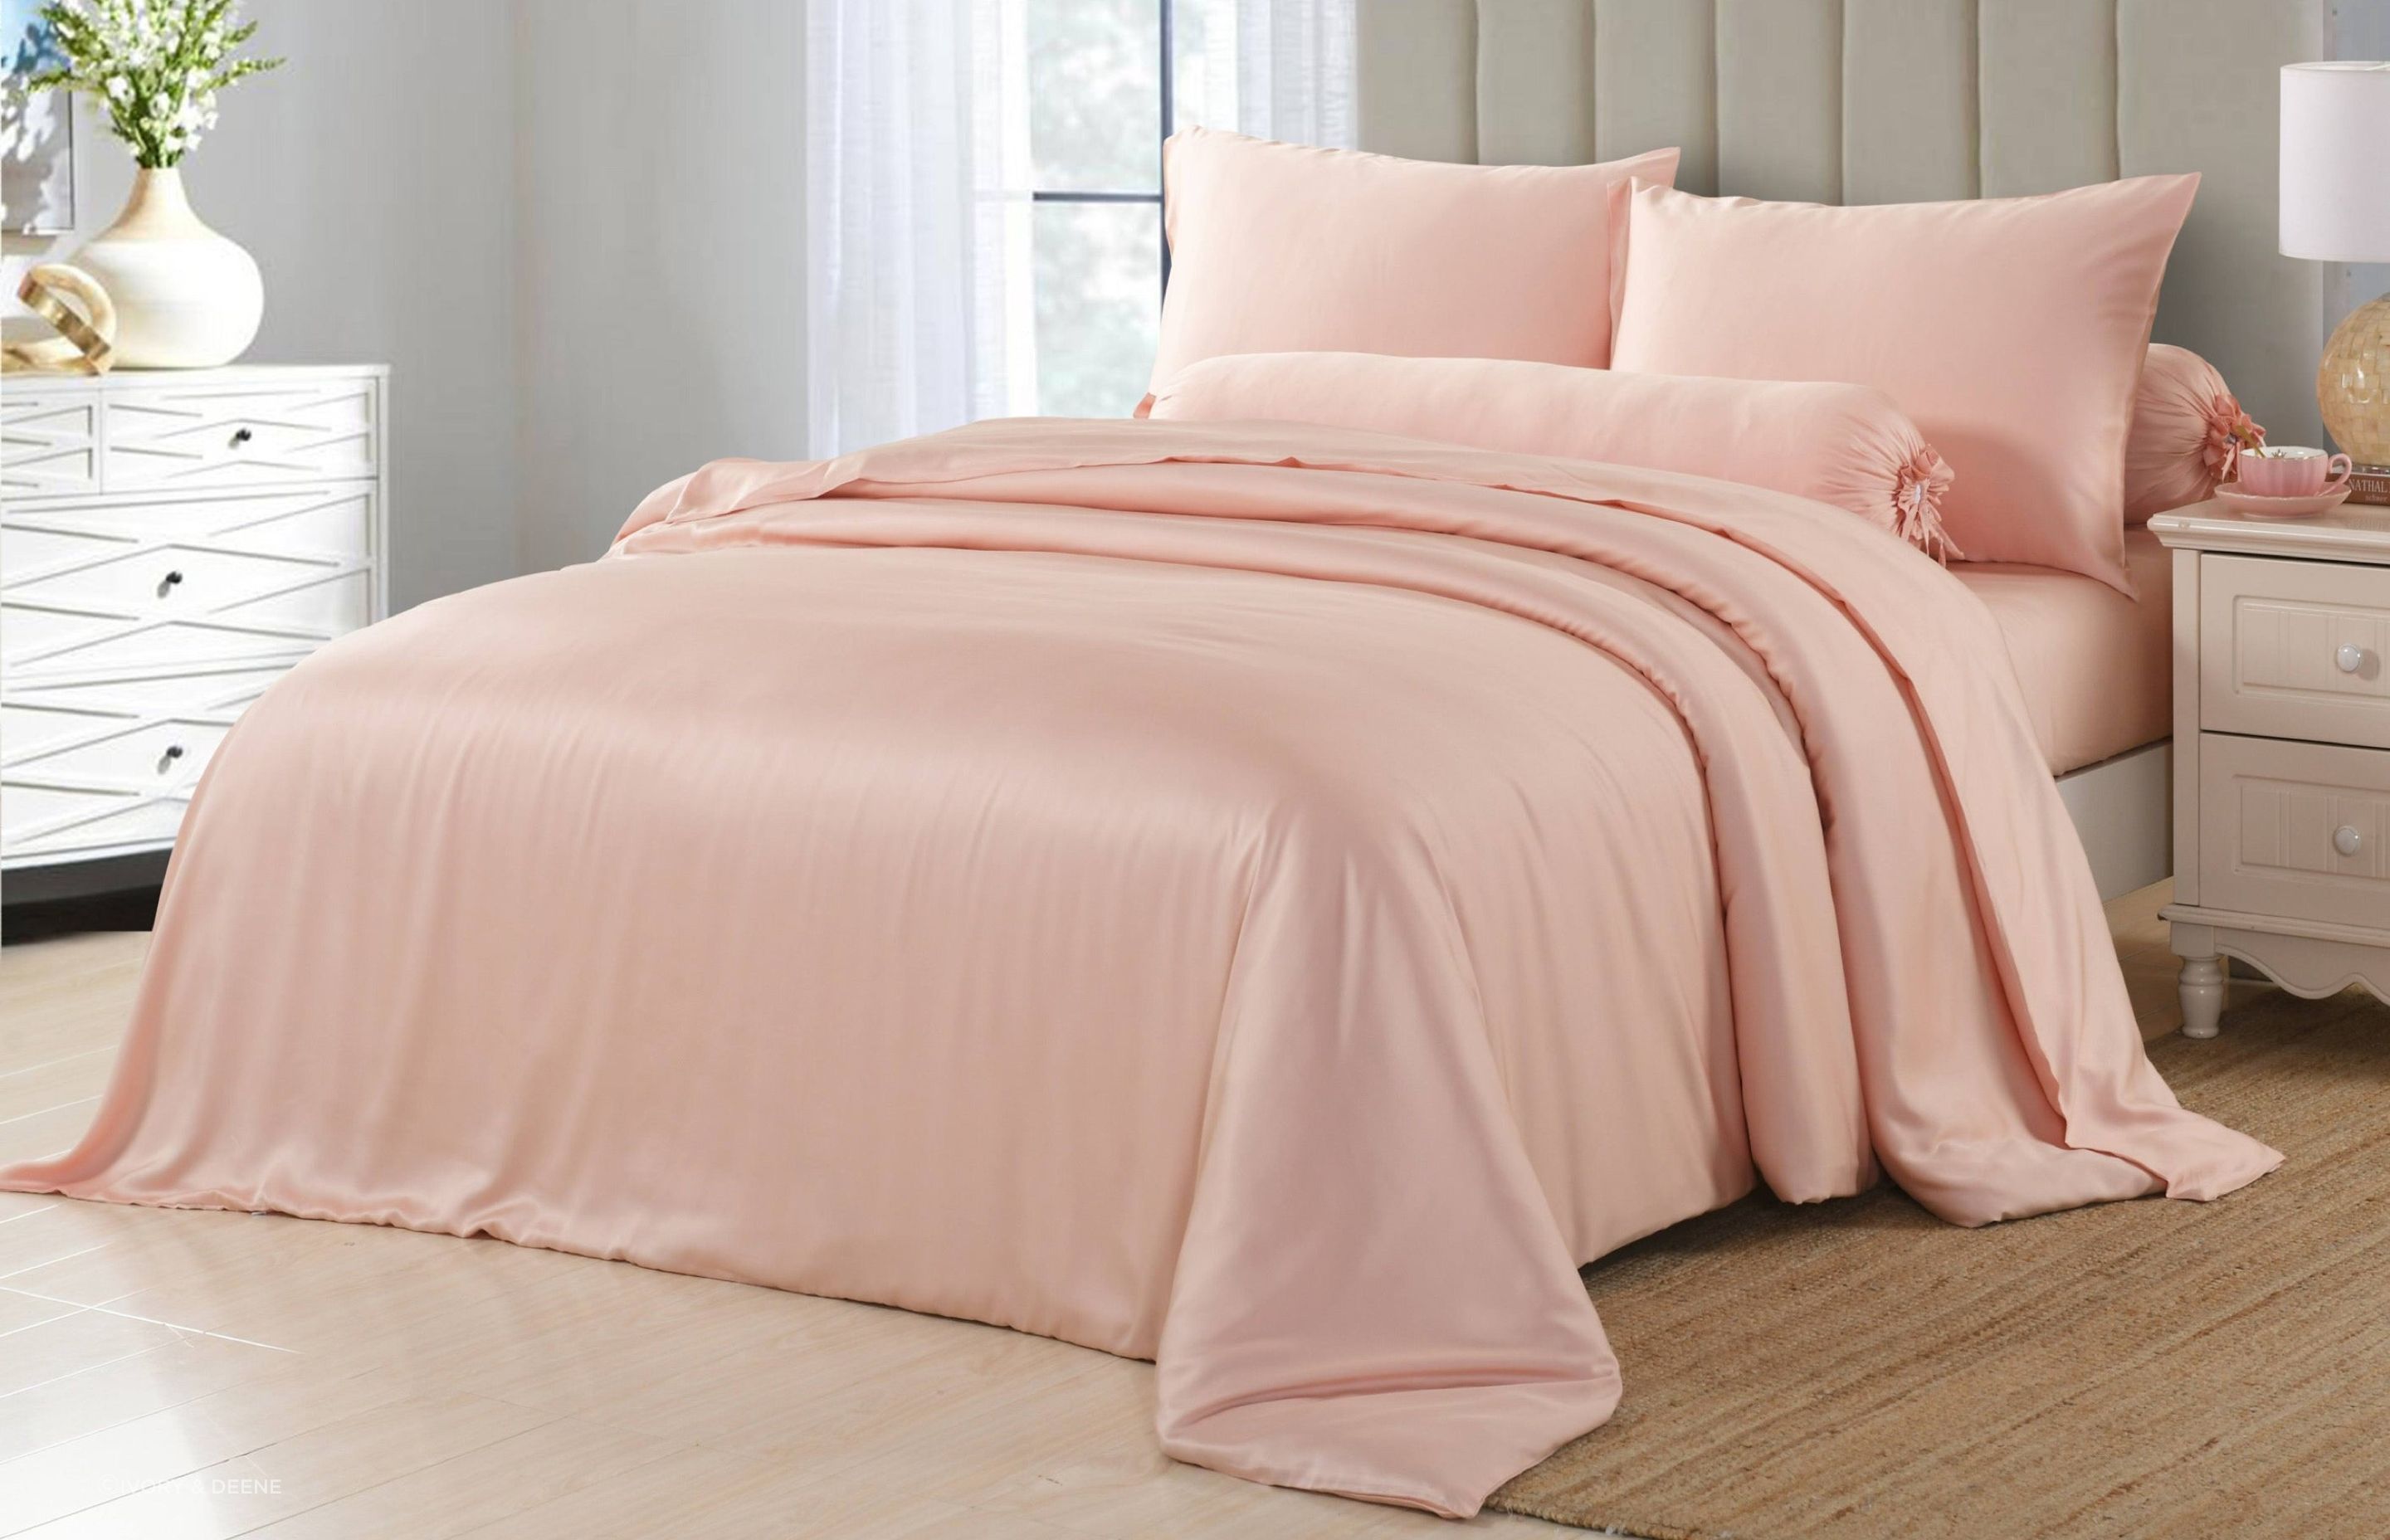 Super soft and excellent temperature control for all year use with the Silky Soft Bamboo Sheet Set